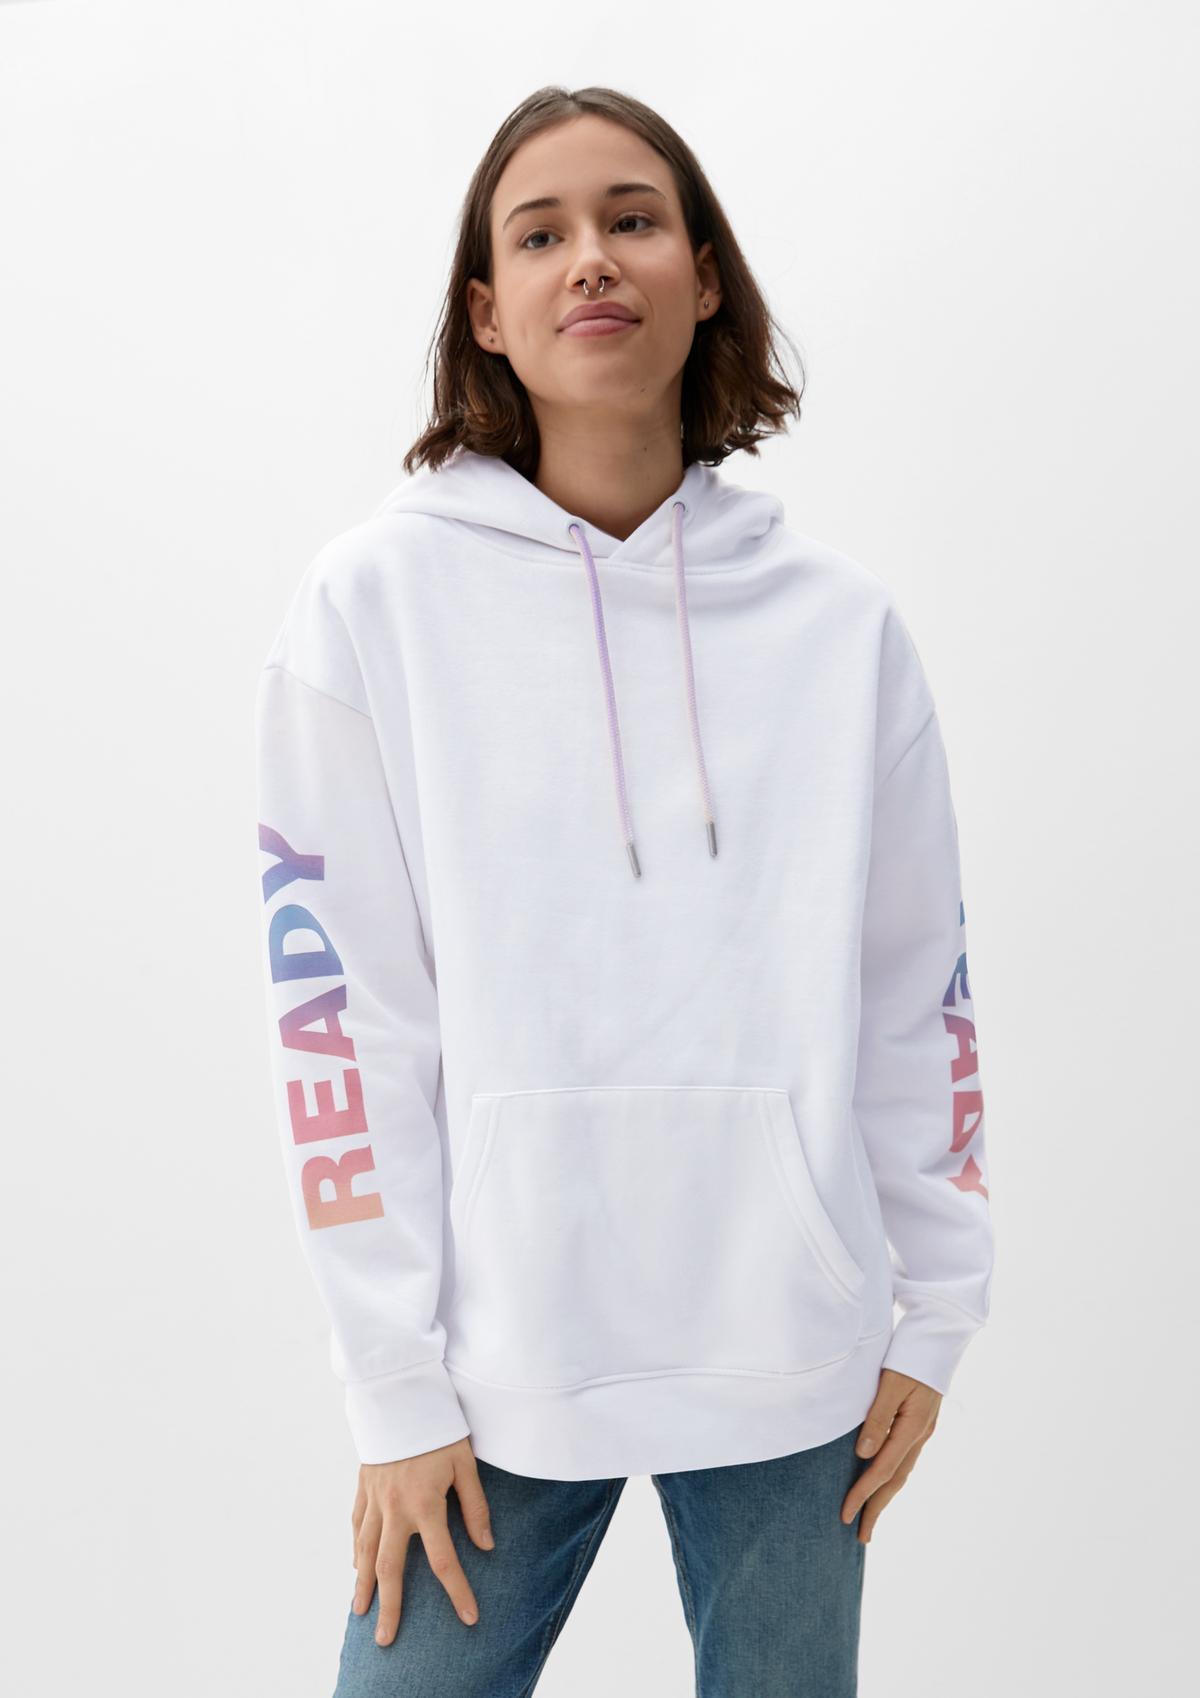 back with white Hooded sweatshirt print - a